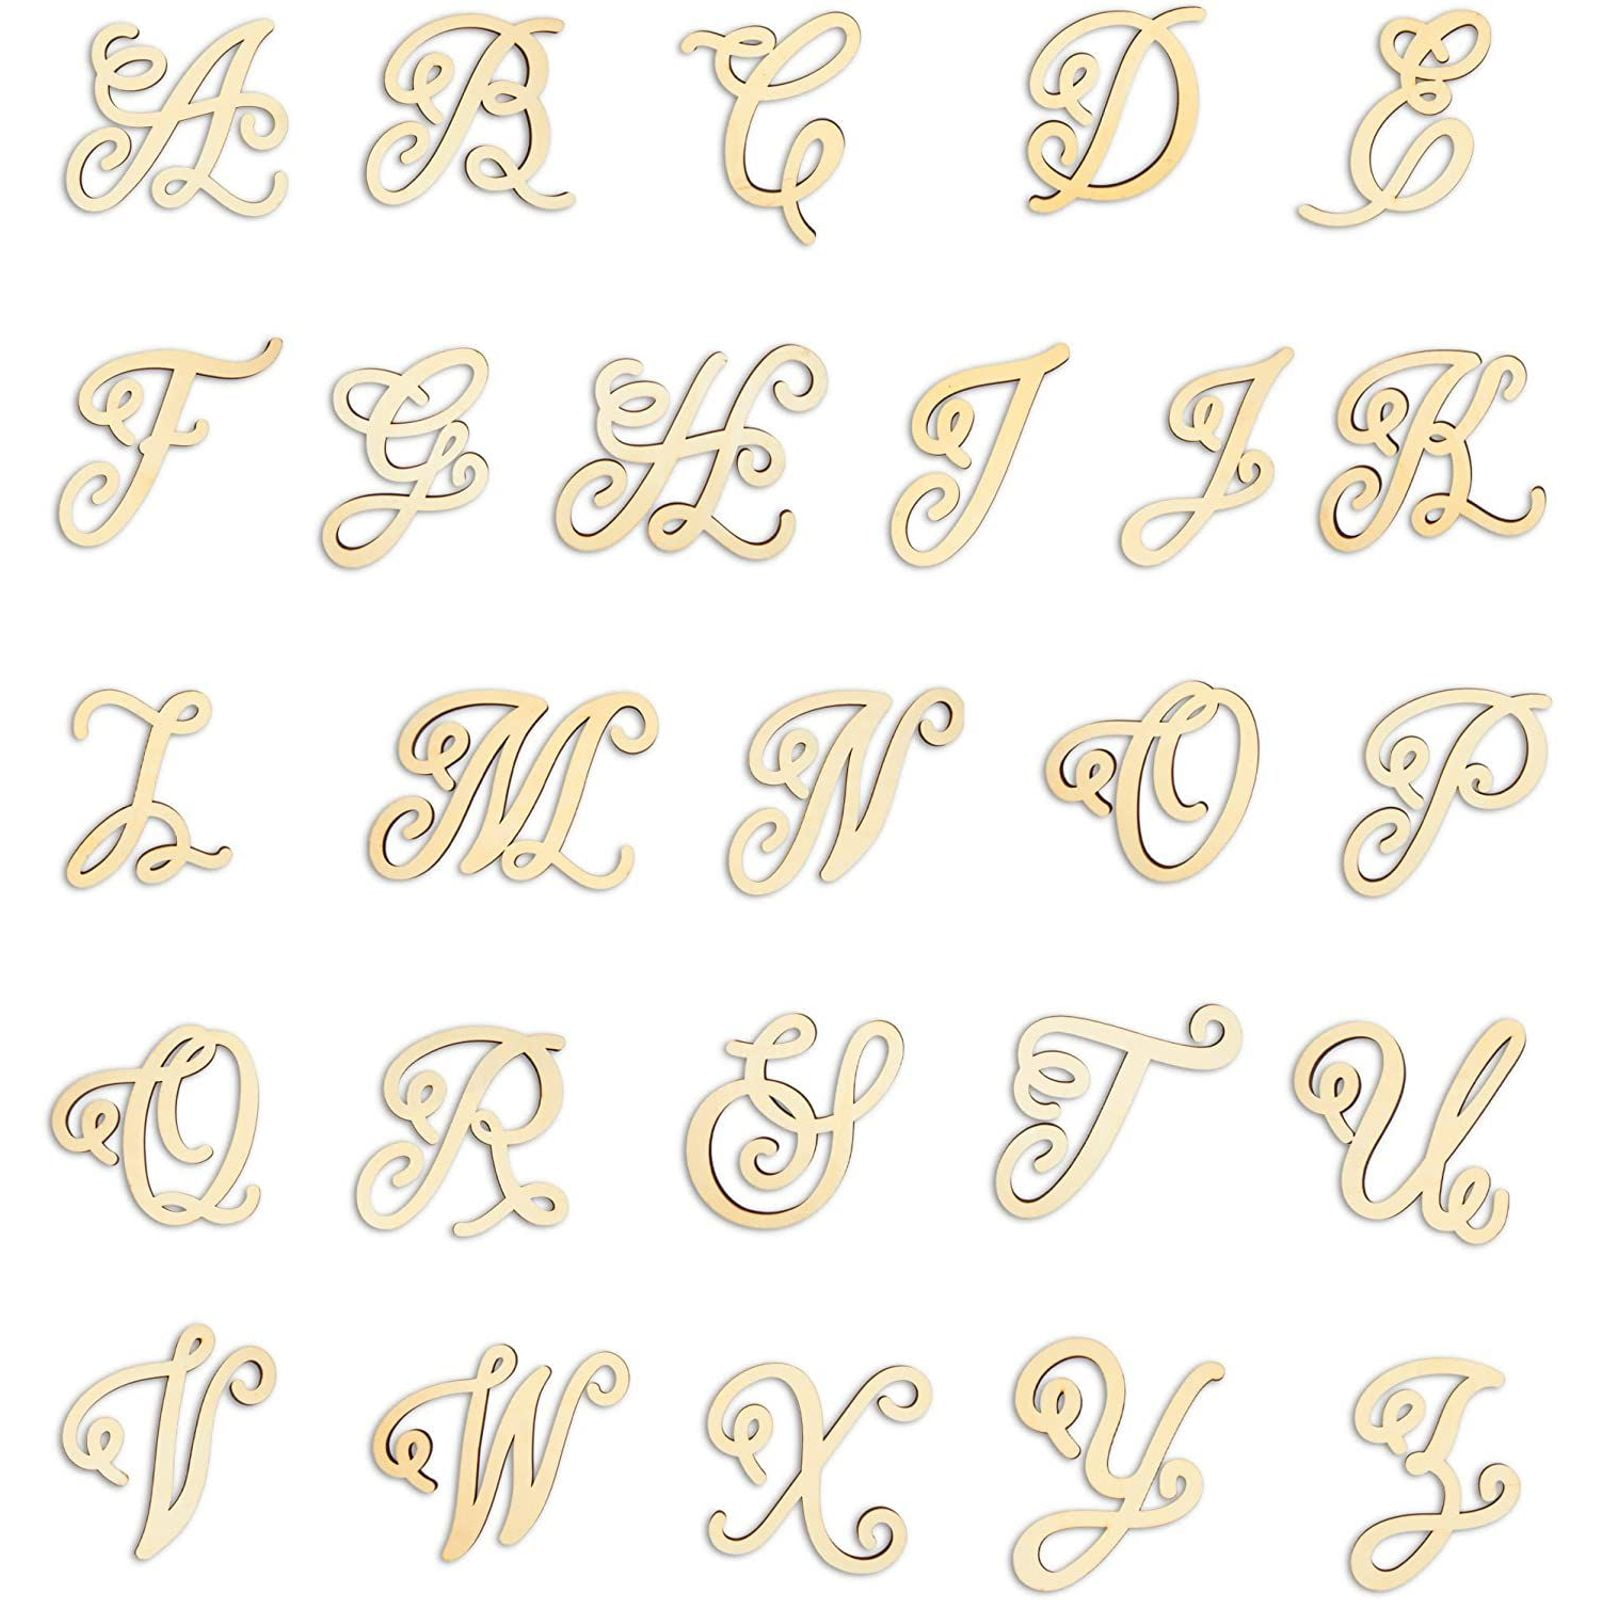 Walbest 5Pcs Mini Letter Numbers Metal Crystal Handmade DIY Letter Sticker  Luxury Anti-fade 3mm Lowercase Uppercase Letters Decal